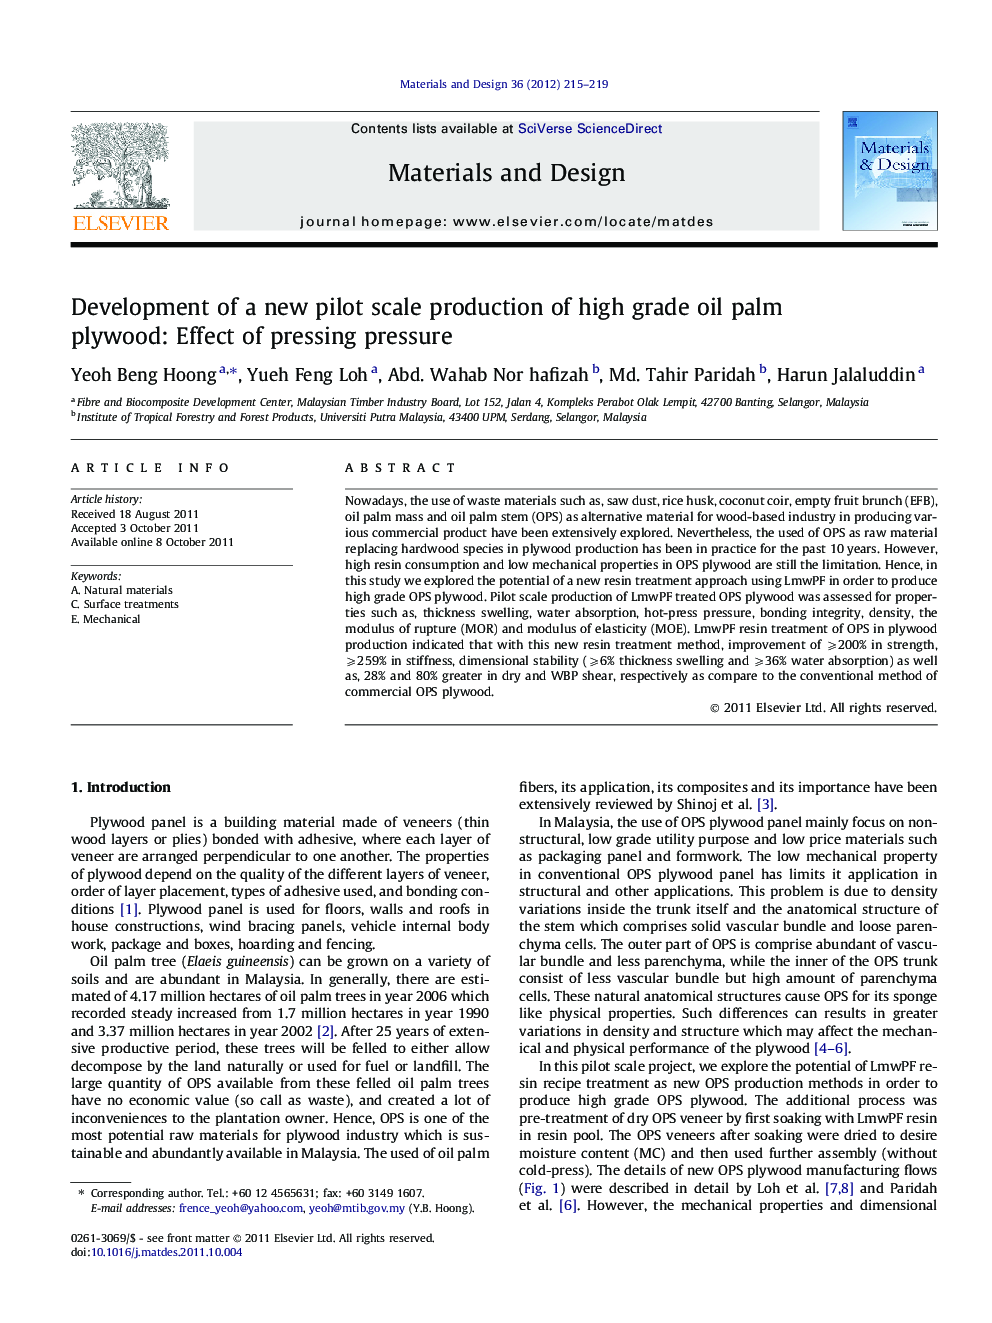 Development of a new pilot scale production of high grade oil palm plywood: Effect of pressing pressure